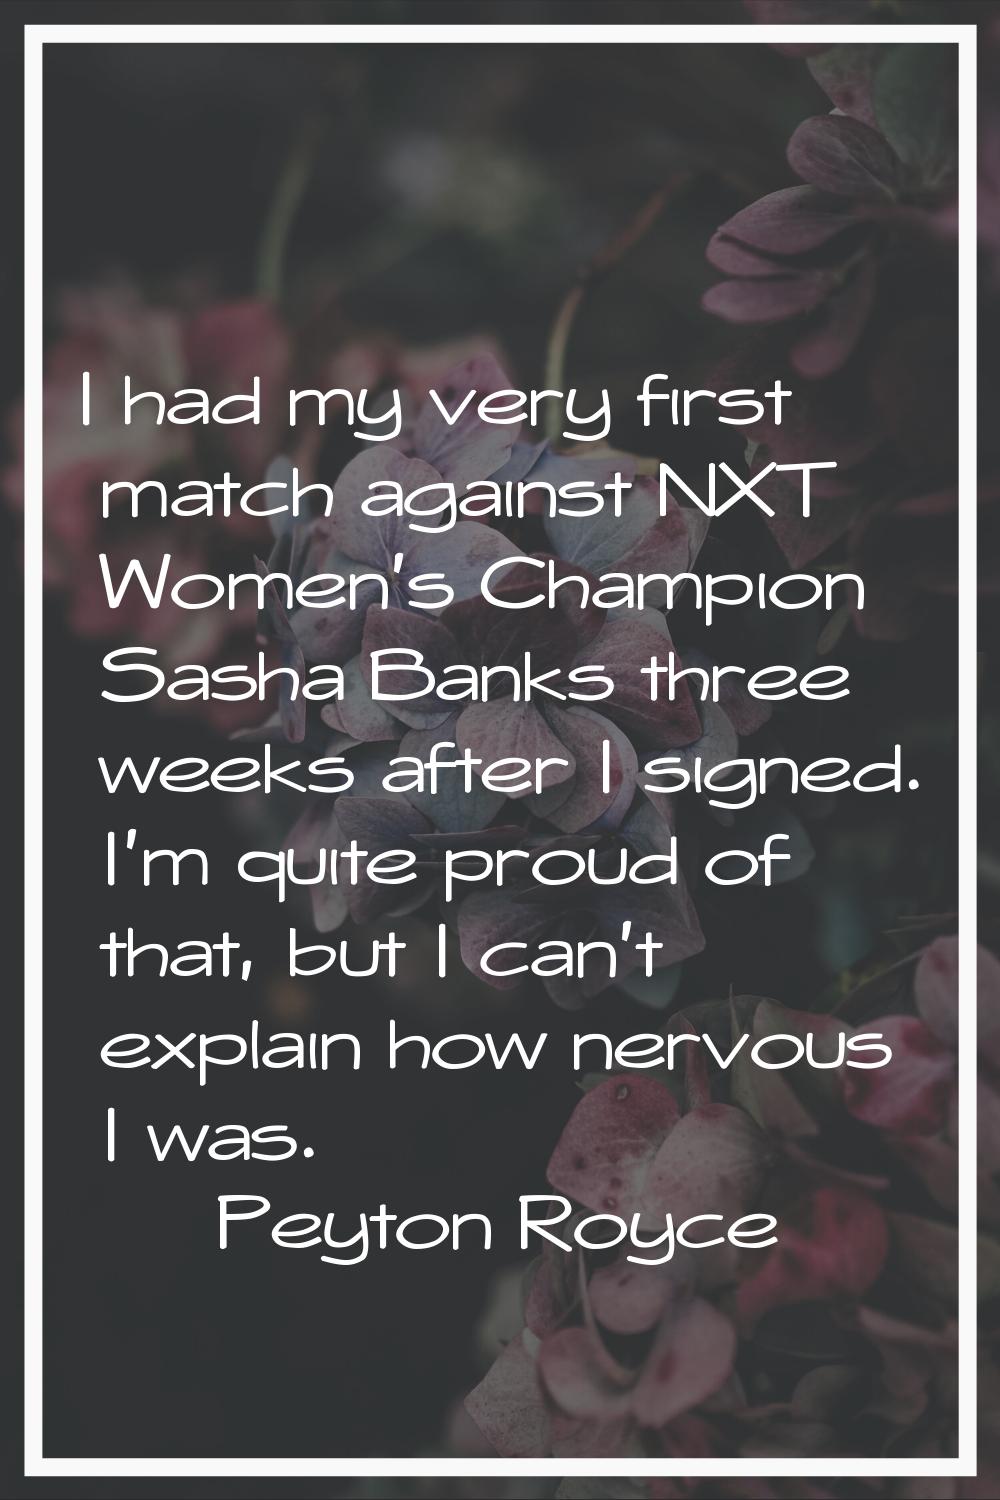 I had my very first match against NXT Women's Champion Sasha Banks three weeks after I signed. I'm 